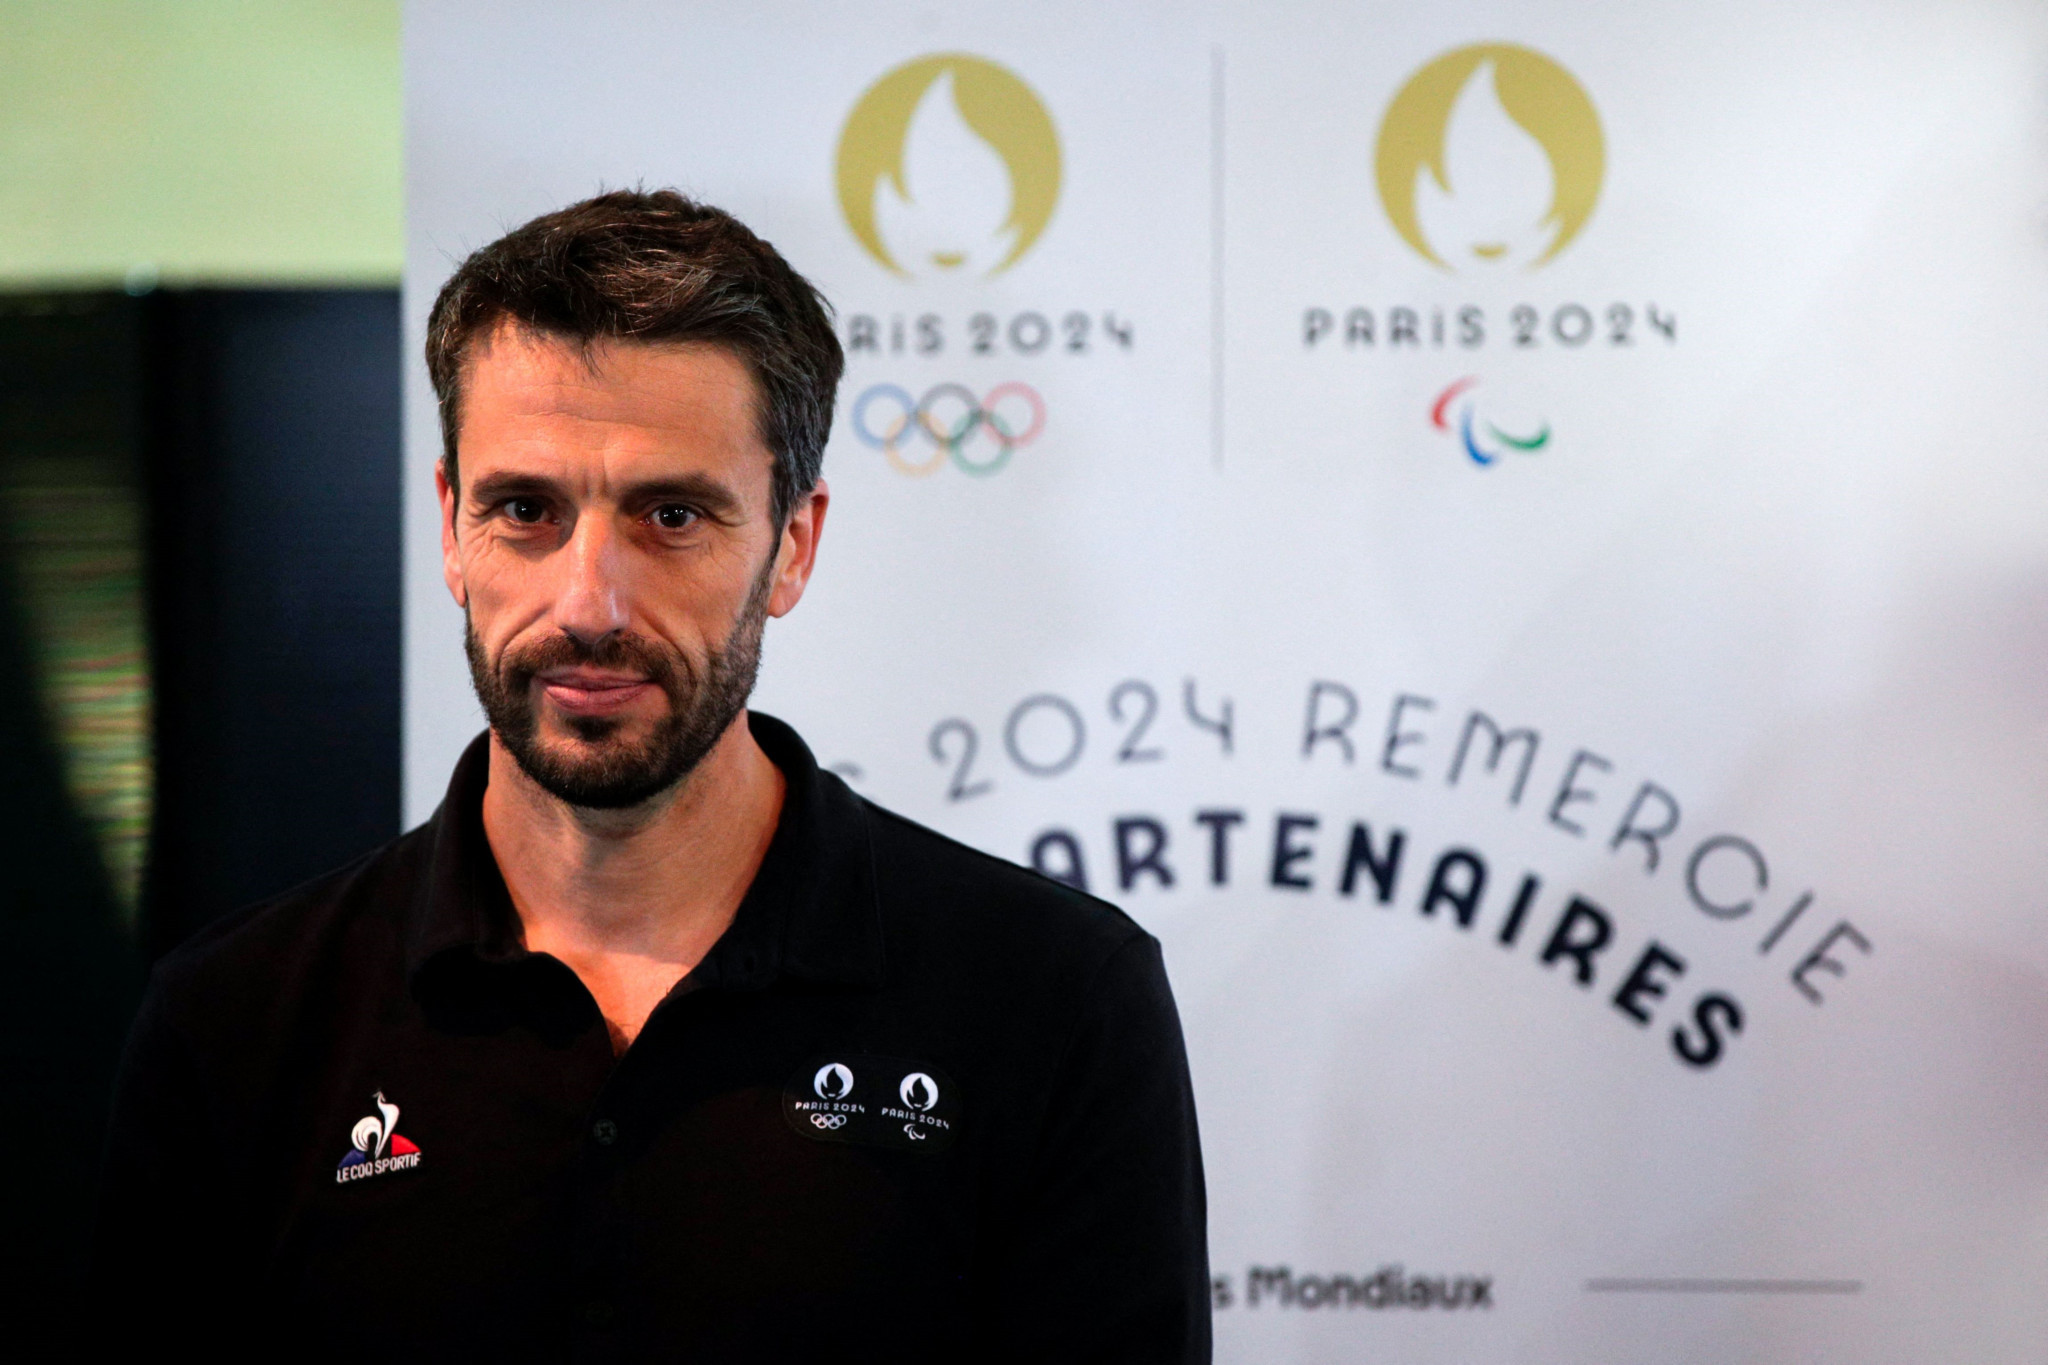 Paris 2024 President Tony Estanguet wants to double the amount of vegetarian food compared to previous Olympic Games ©Getty Images